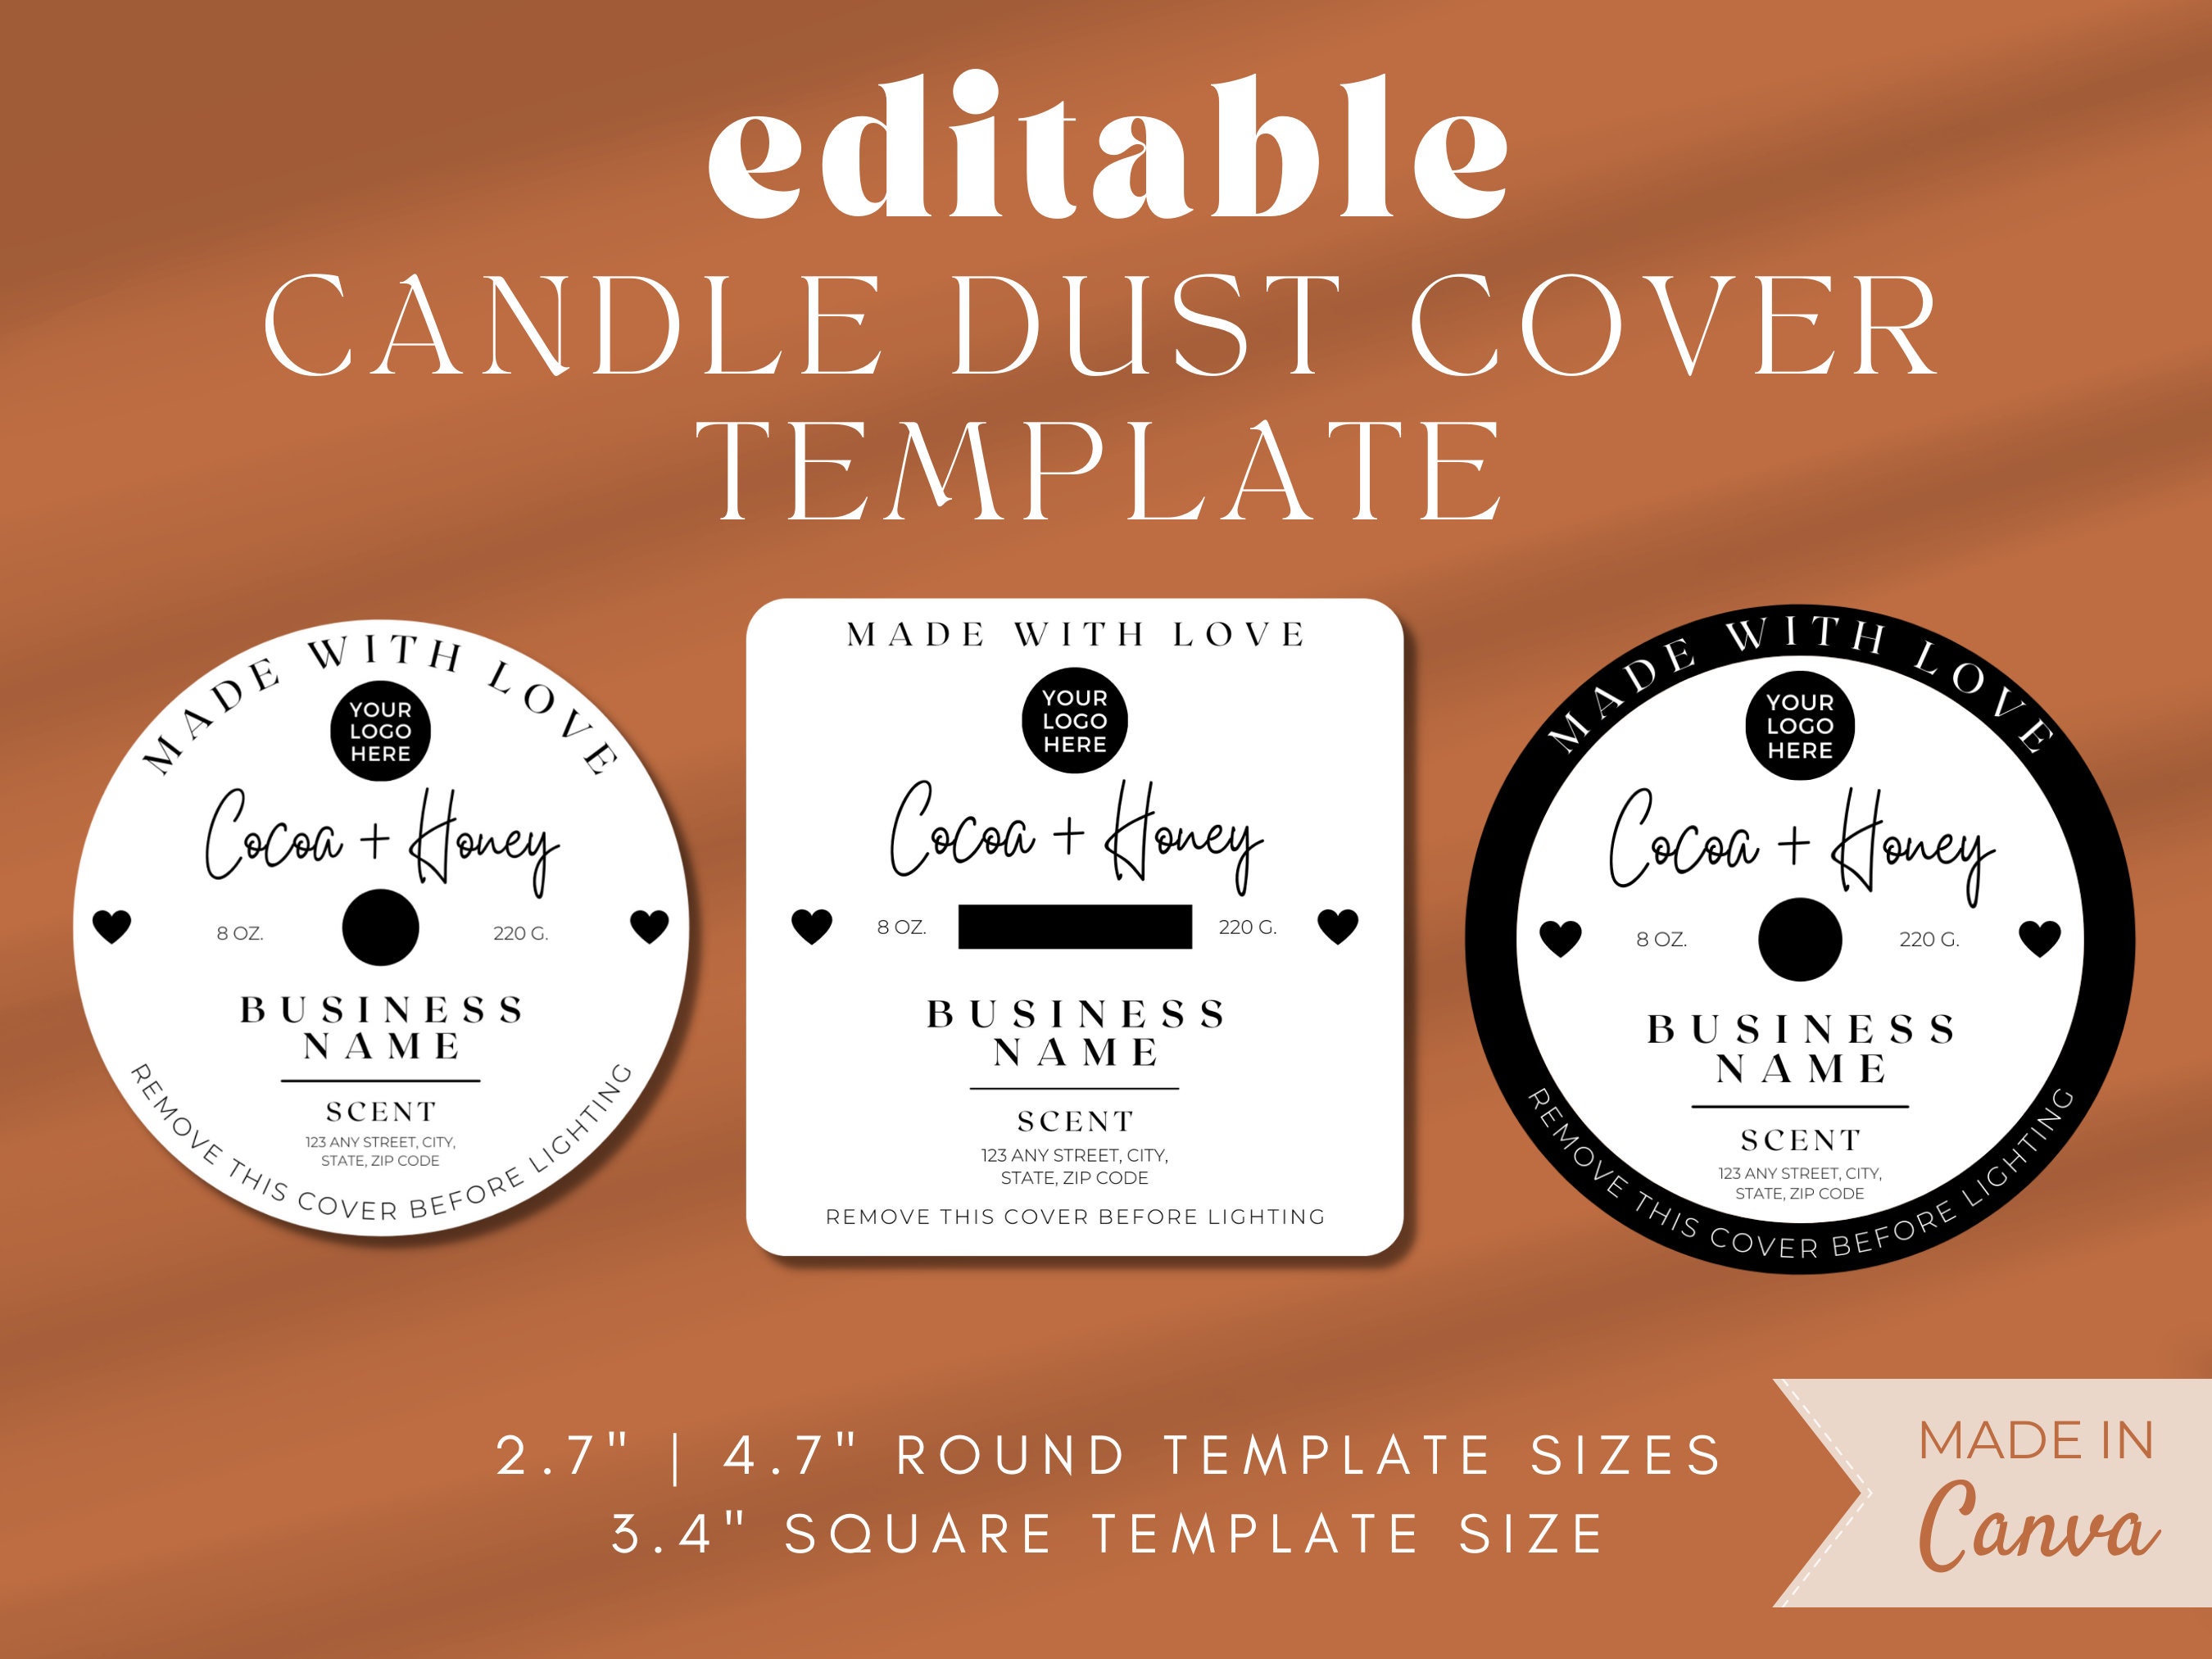 Candle Dust Covers Template, Editable Dust Cover Design, Candle